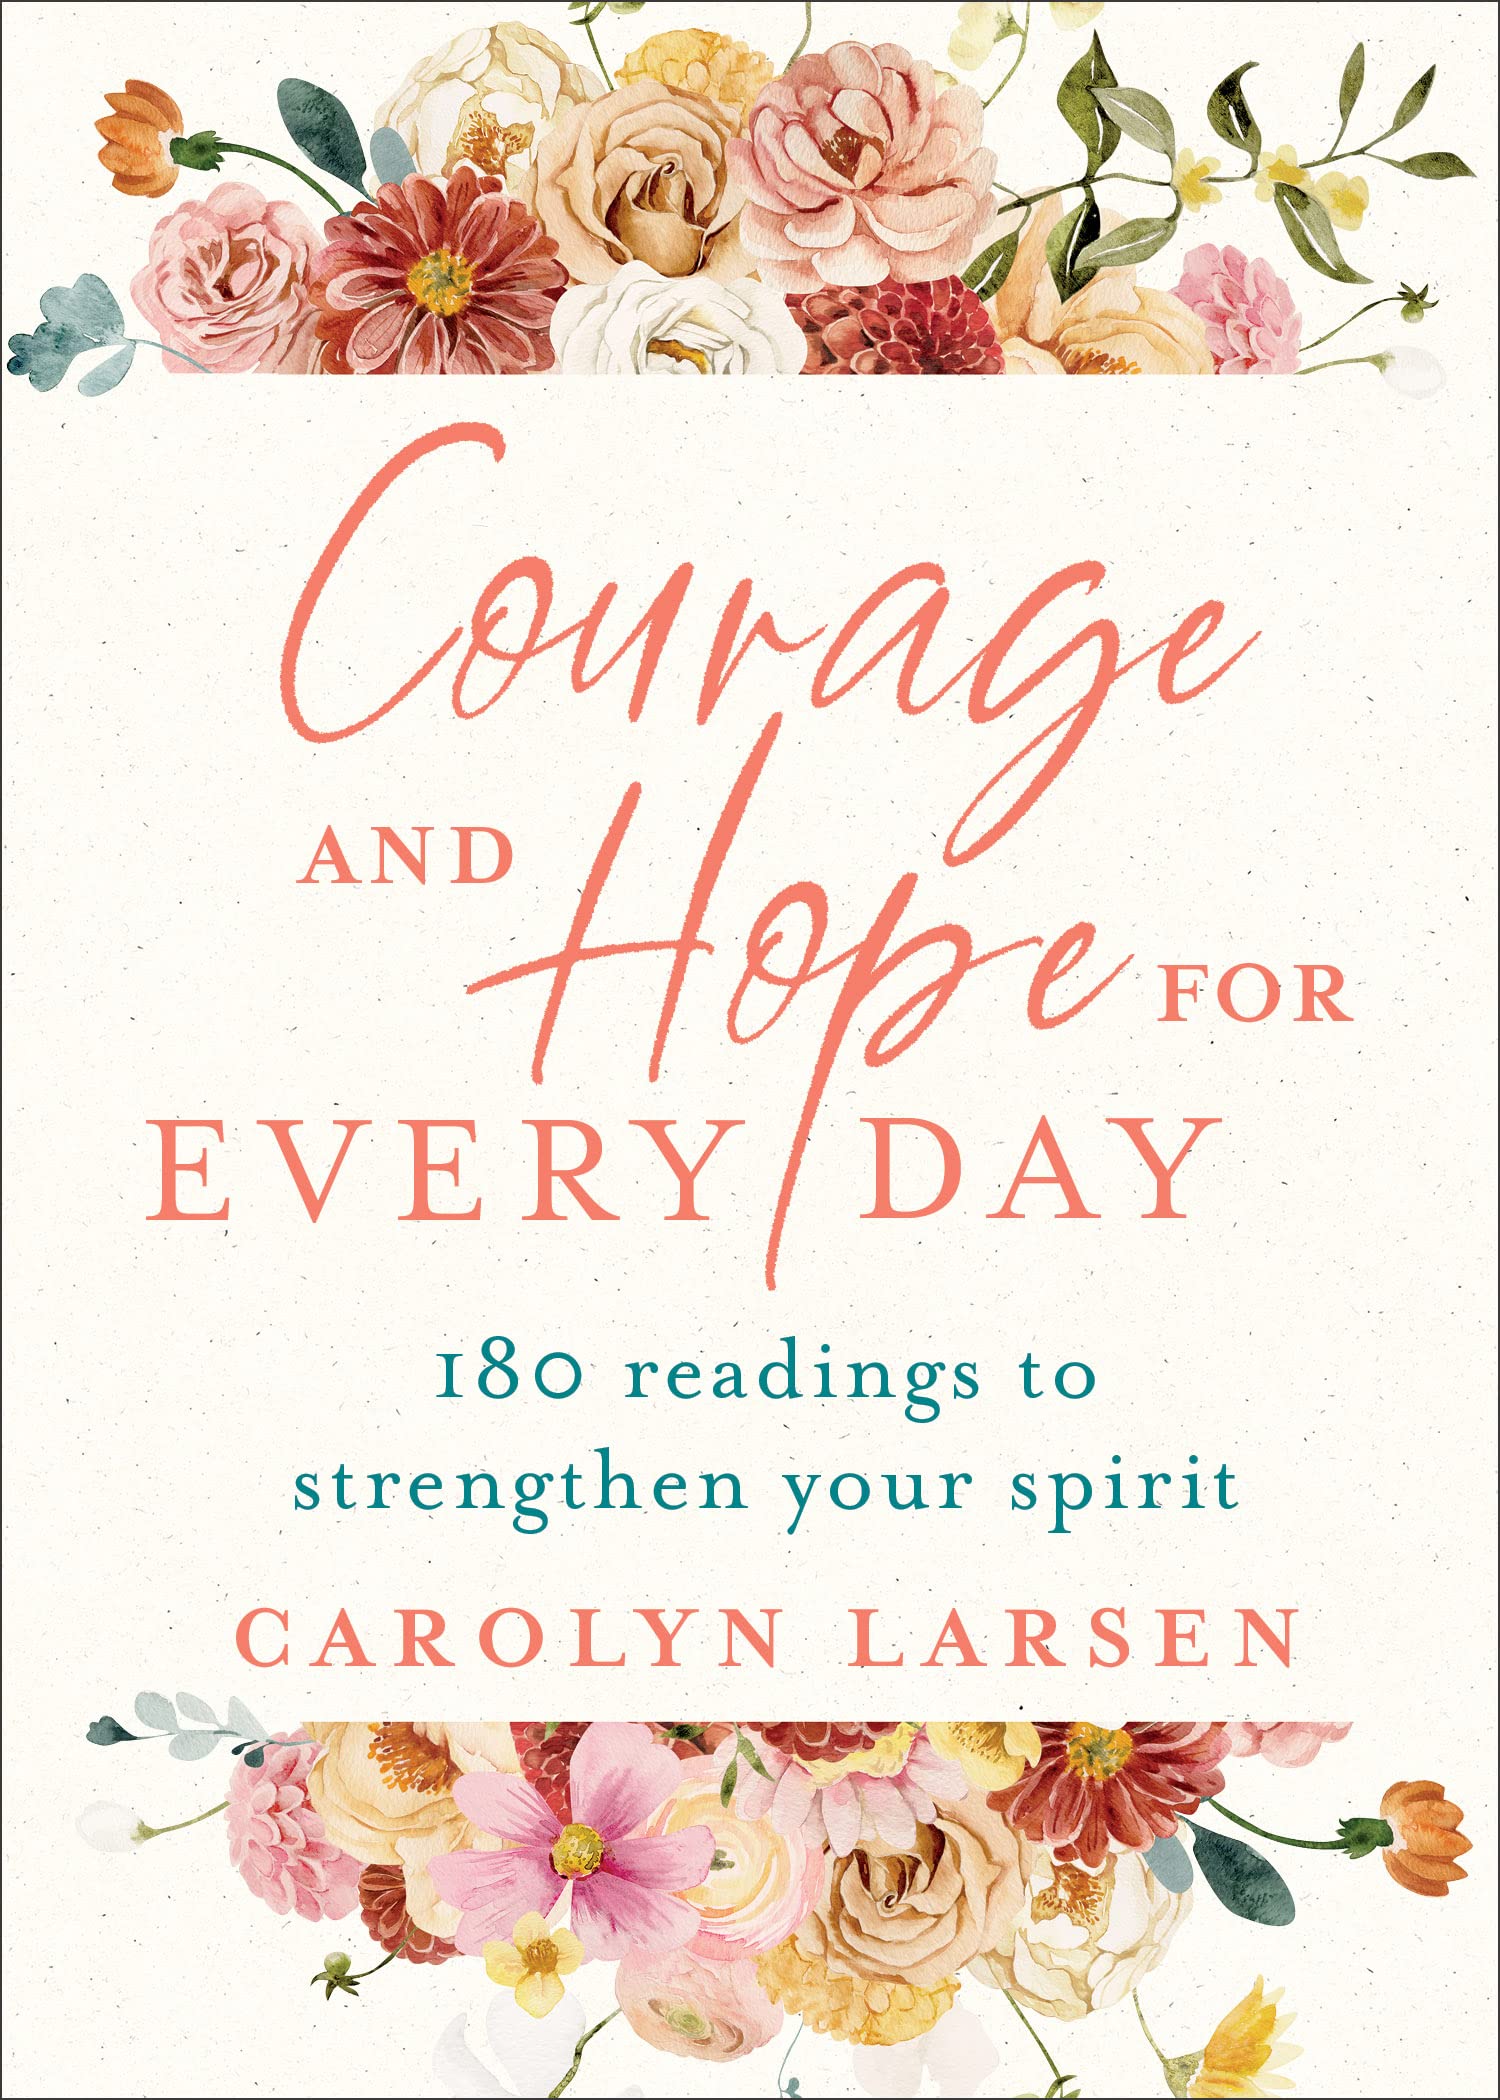 Courage and Hope for Every Day: 180 Readings to Strengthen Your Spirit, Hardcover